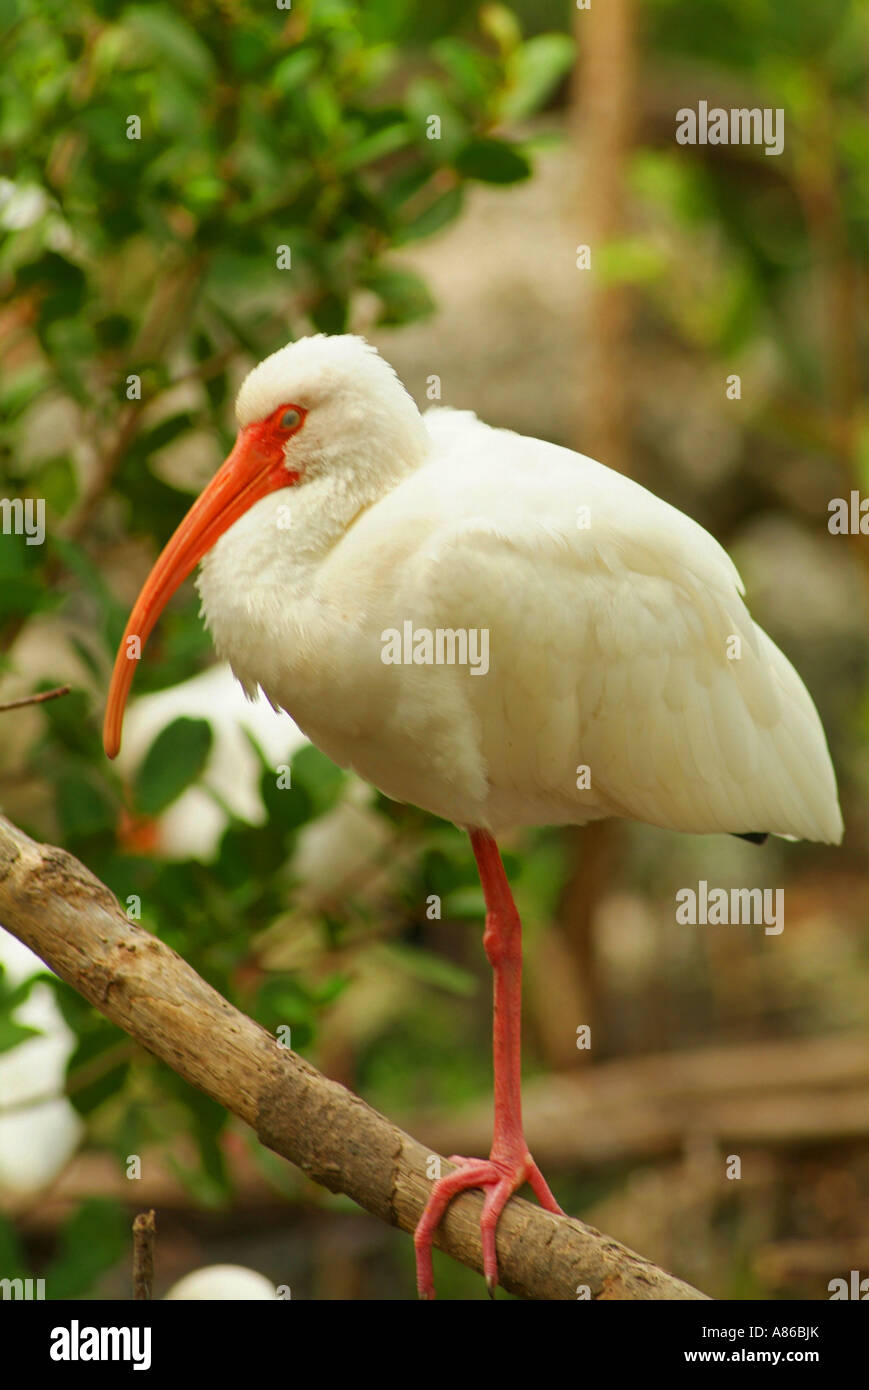 The Florida Keys Wild Bird Center attracts many varieties of wild shore birds including the white ibis Stock Photo